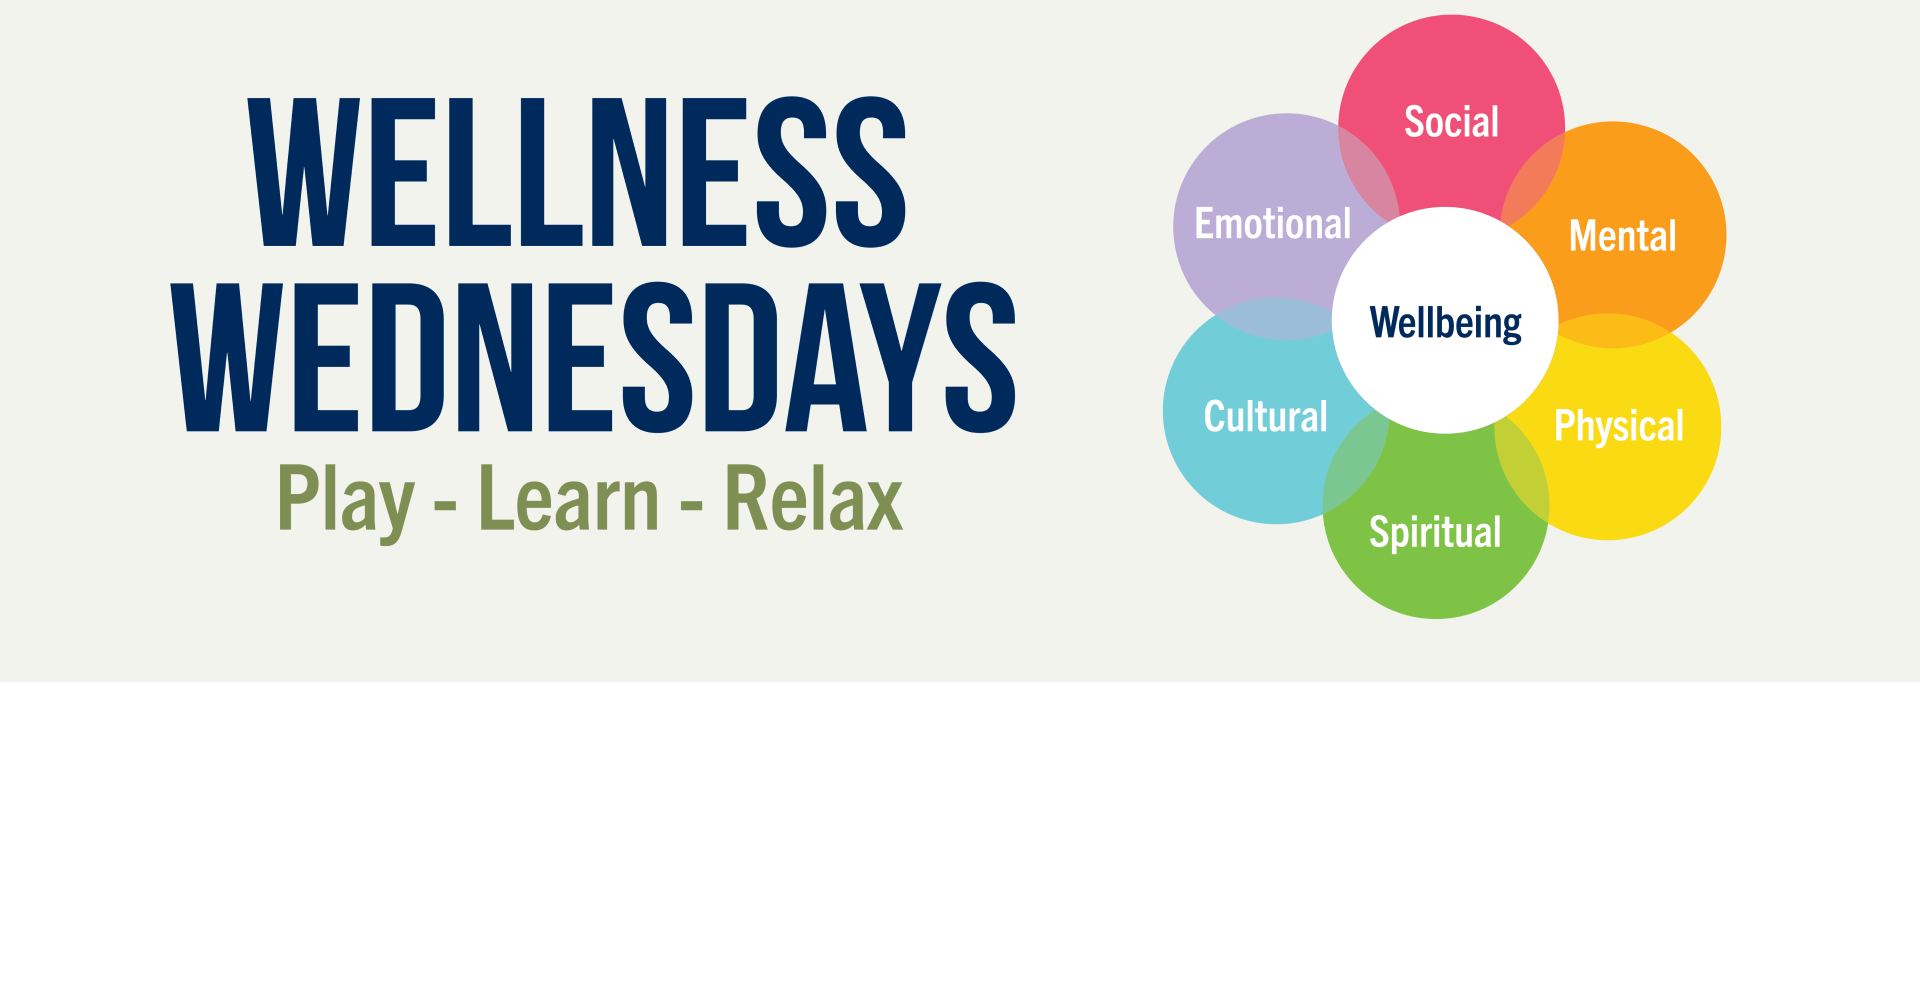 Wellness Wednesdays. Play, Learn, Relax. Wellbeing circle with 6 other circles for social, mental, physical, spiritual, cultural and emotional.